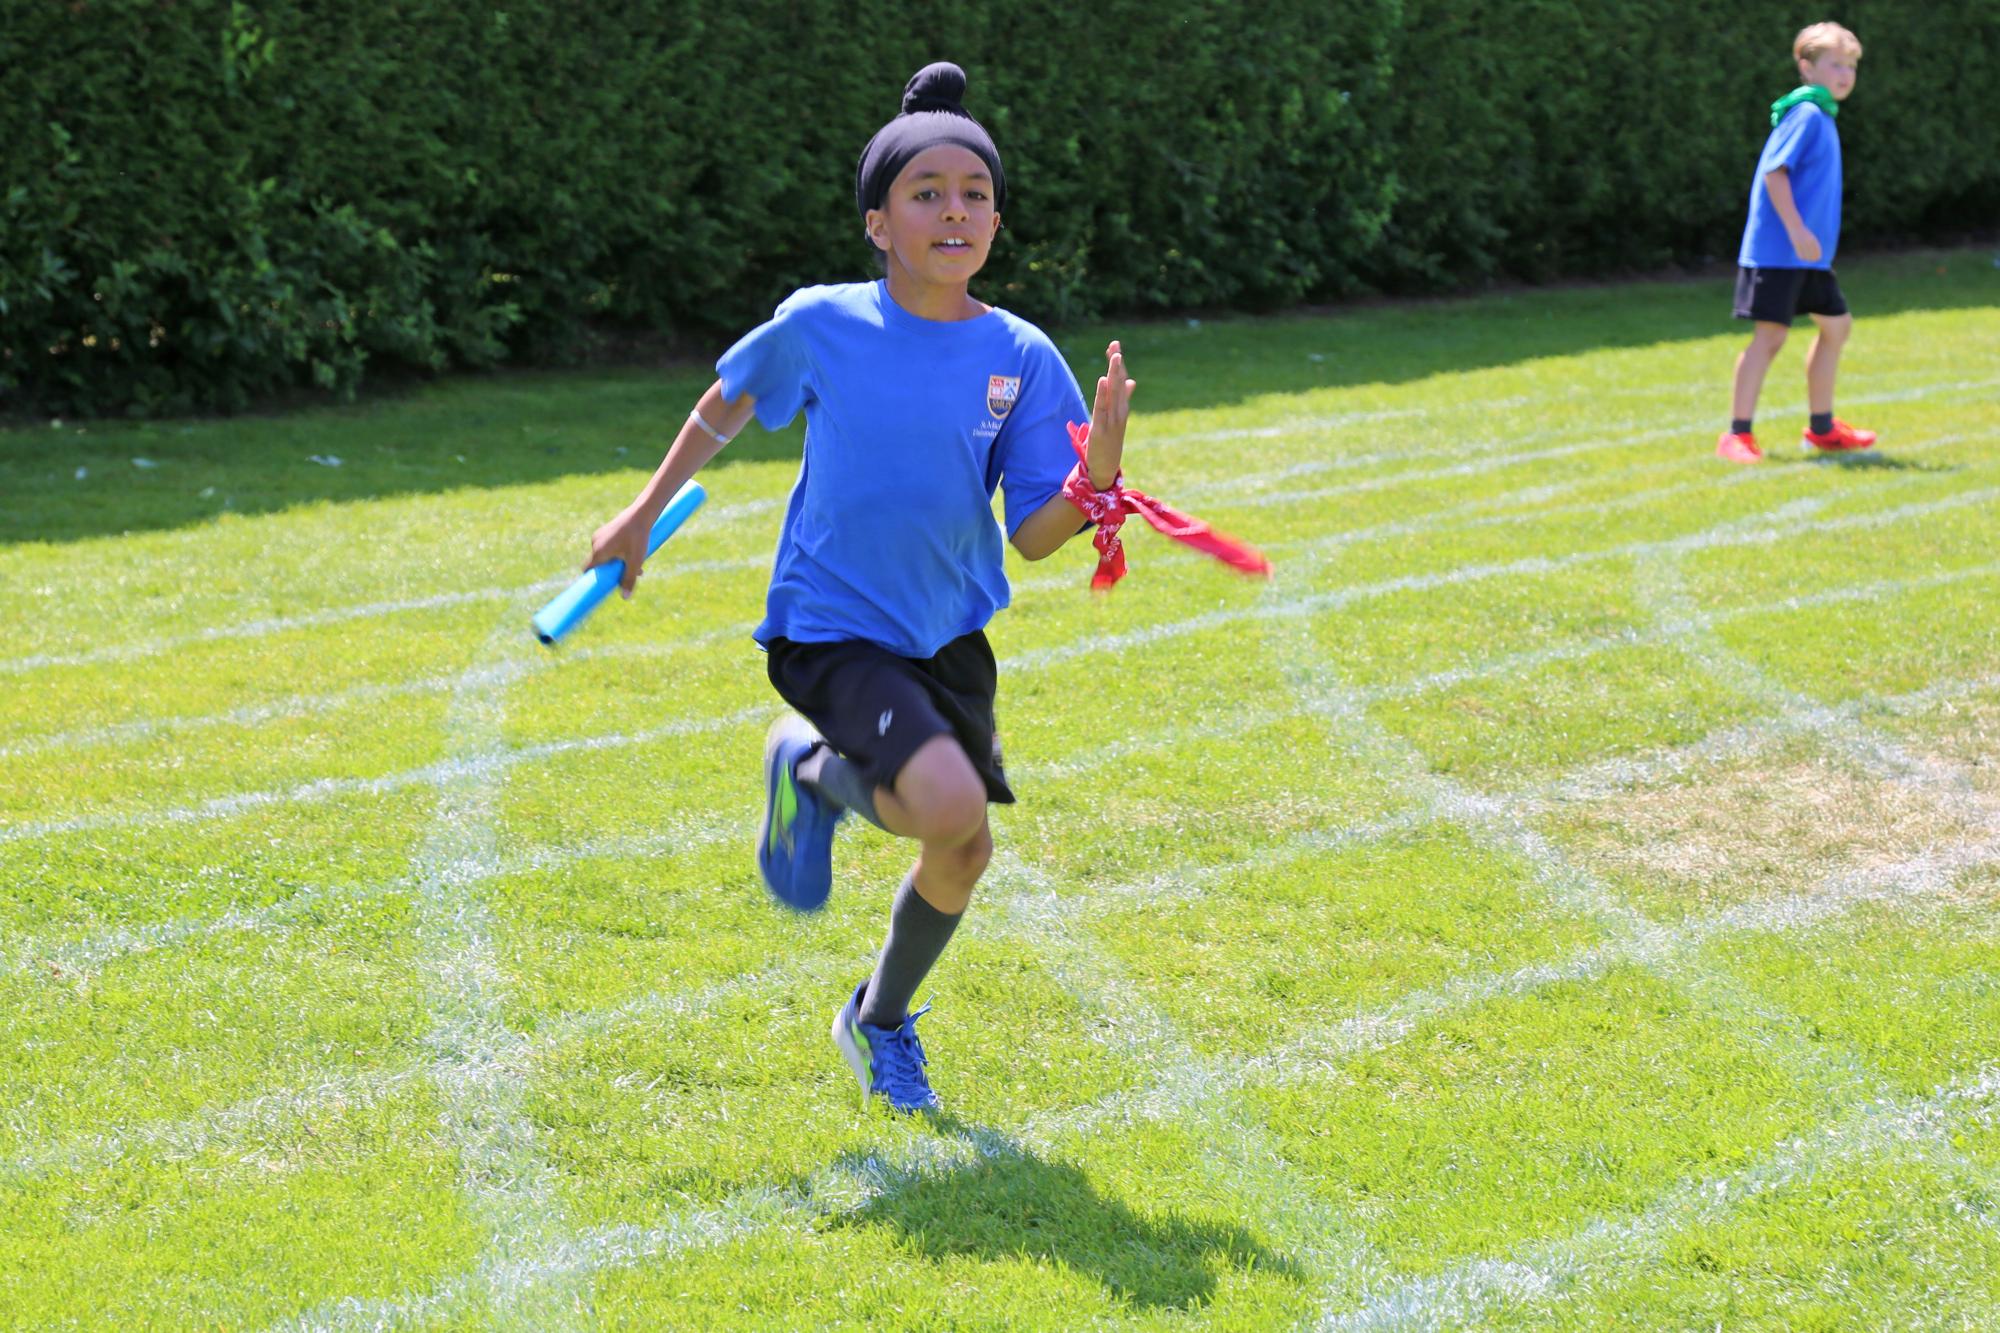 A student participates in a track and field relay -- running and carrying a baton -- during Sports Day at the Junior School.